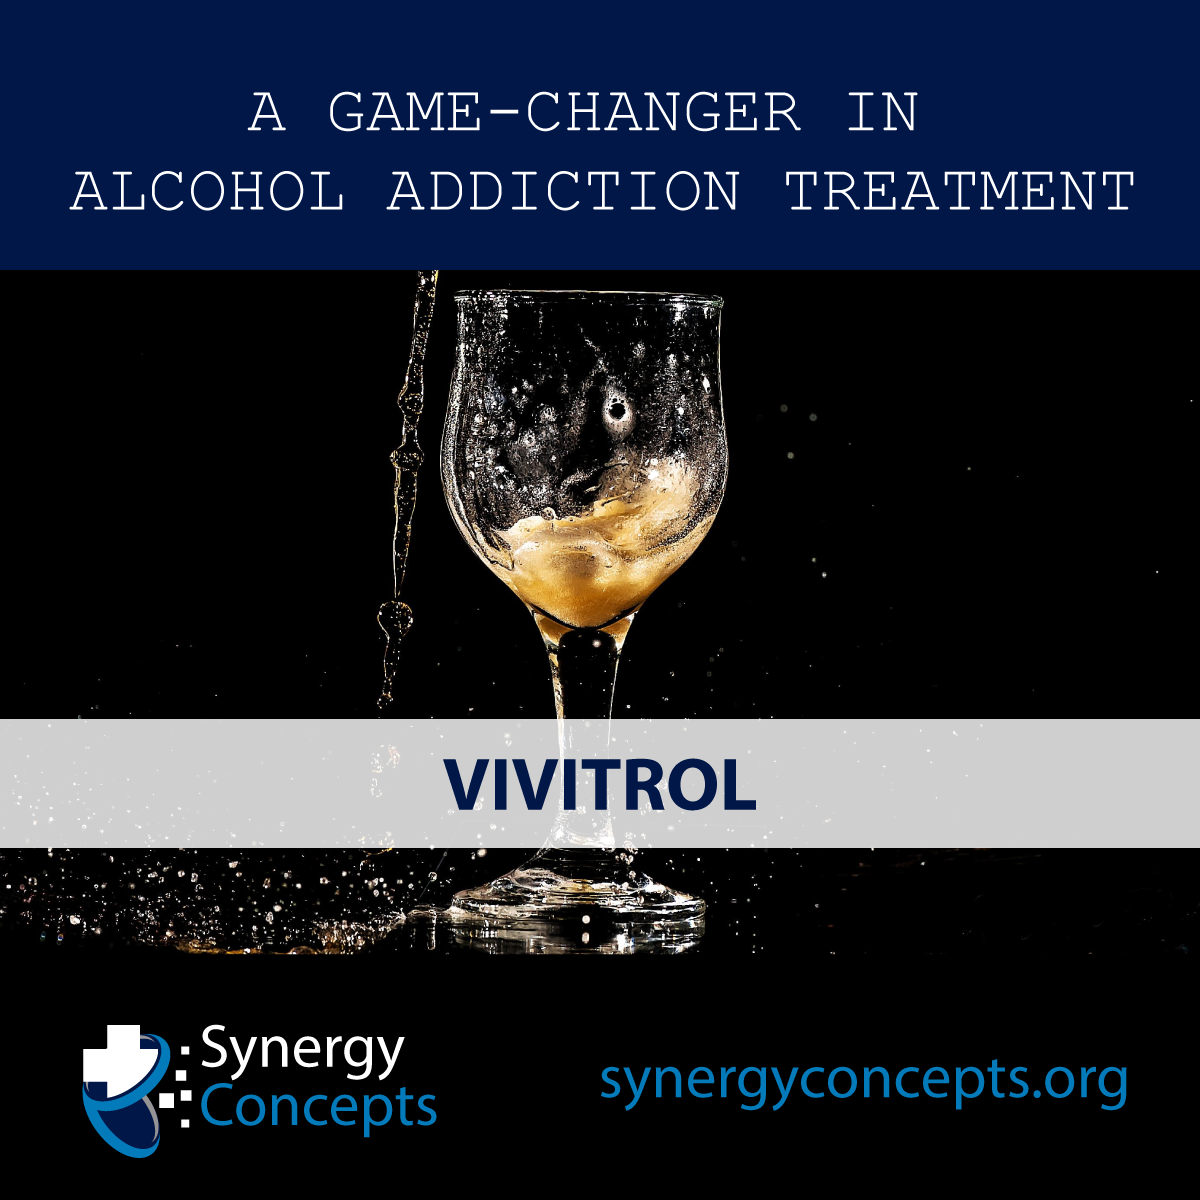 Vivitrol: A Game-Changer in Alcohol Addiction Treatment - Synergy Concepts behavioral health medical billing and coding